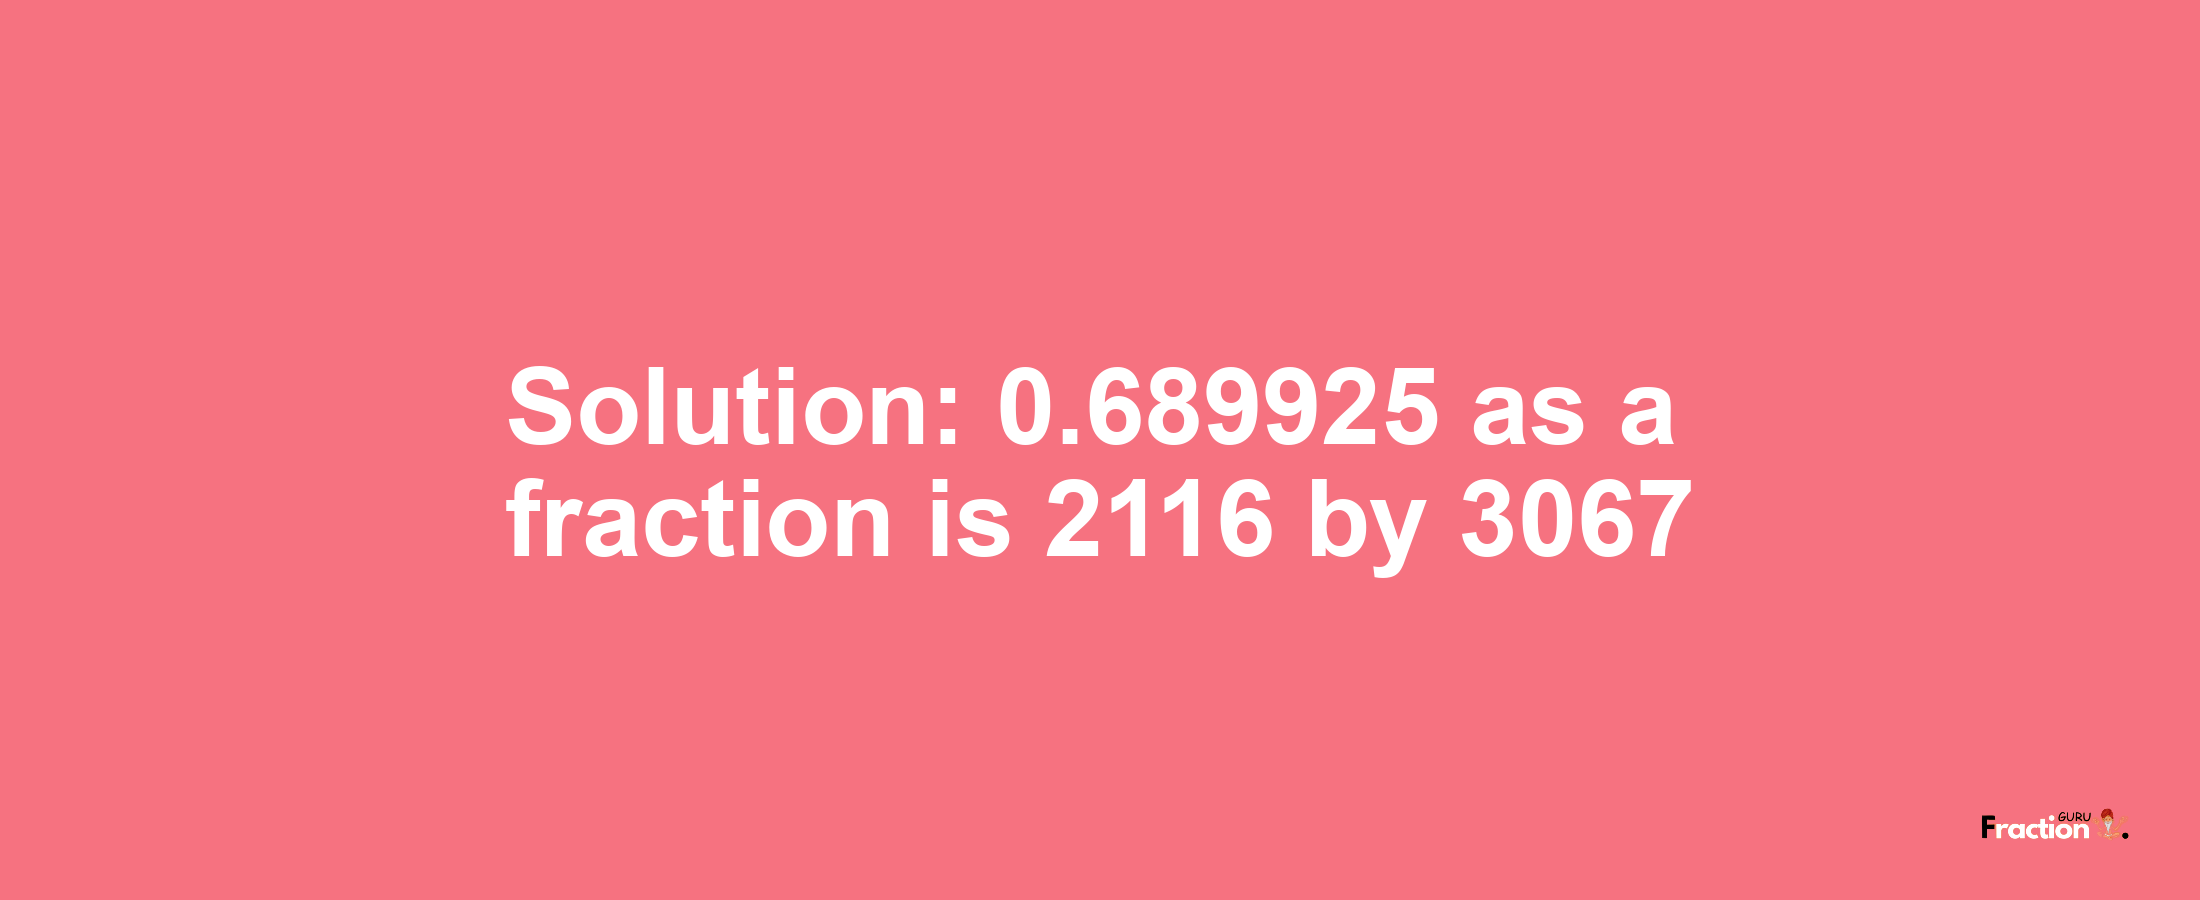 Solution:0.689925 as a fraction is 2116/3067